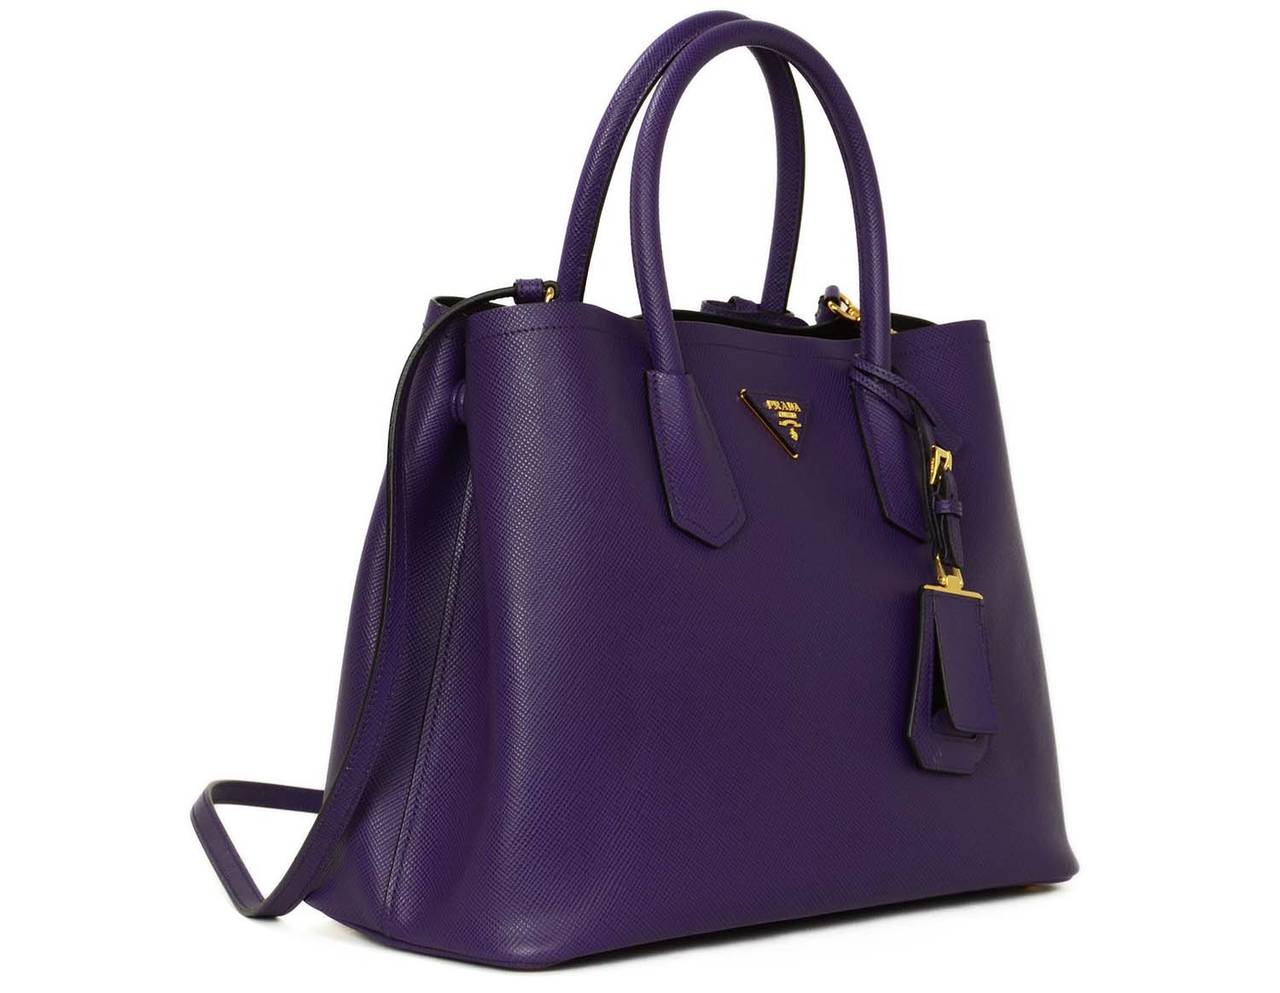 This bag can be worn hand held or can be worn on the shoulder or crossbody using the adjustable strap. Also features a removable tag on the front of the bag.

-Made in: Italy
-Year of Production: 2014
-Color: Viola purple
-Materials: Saffiano